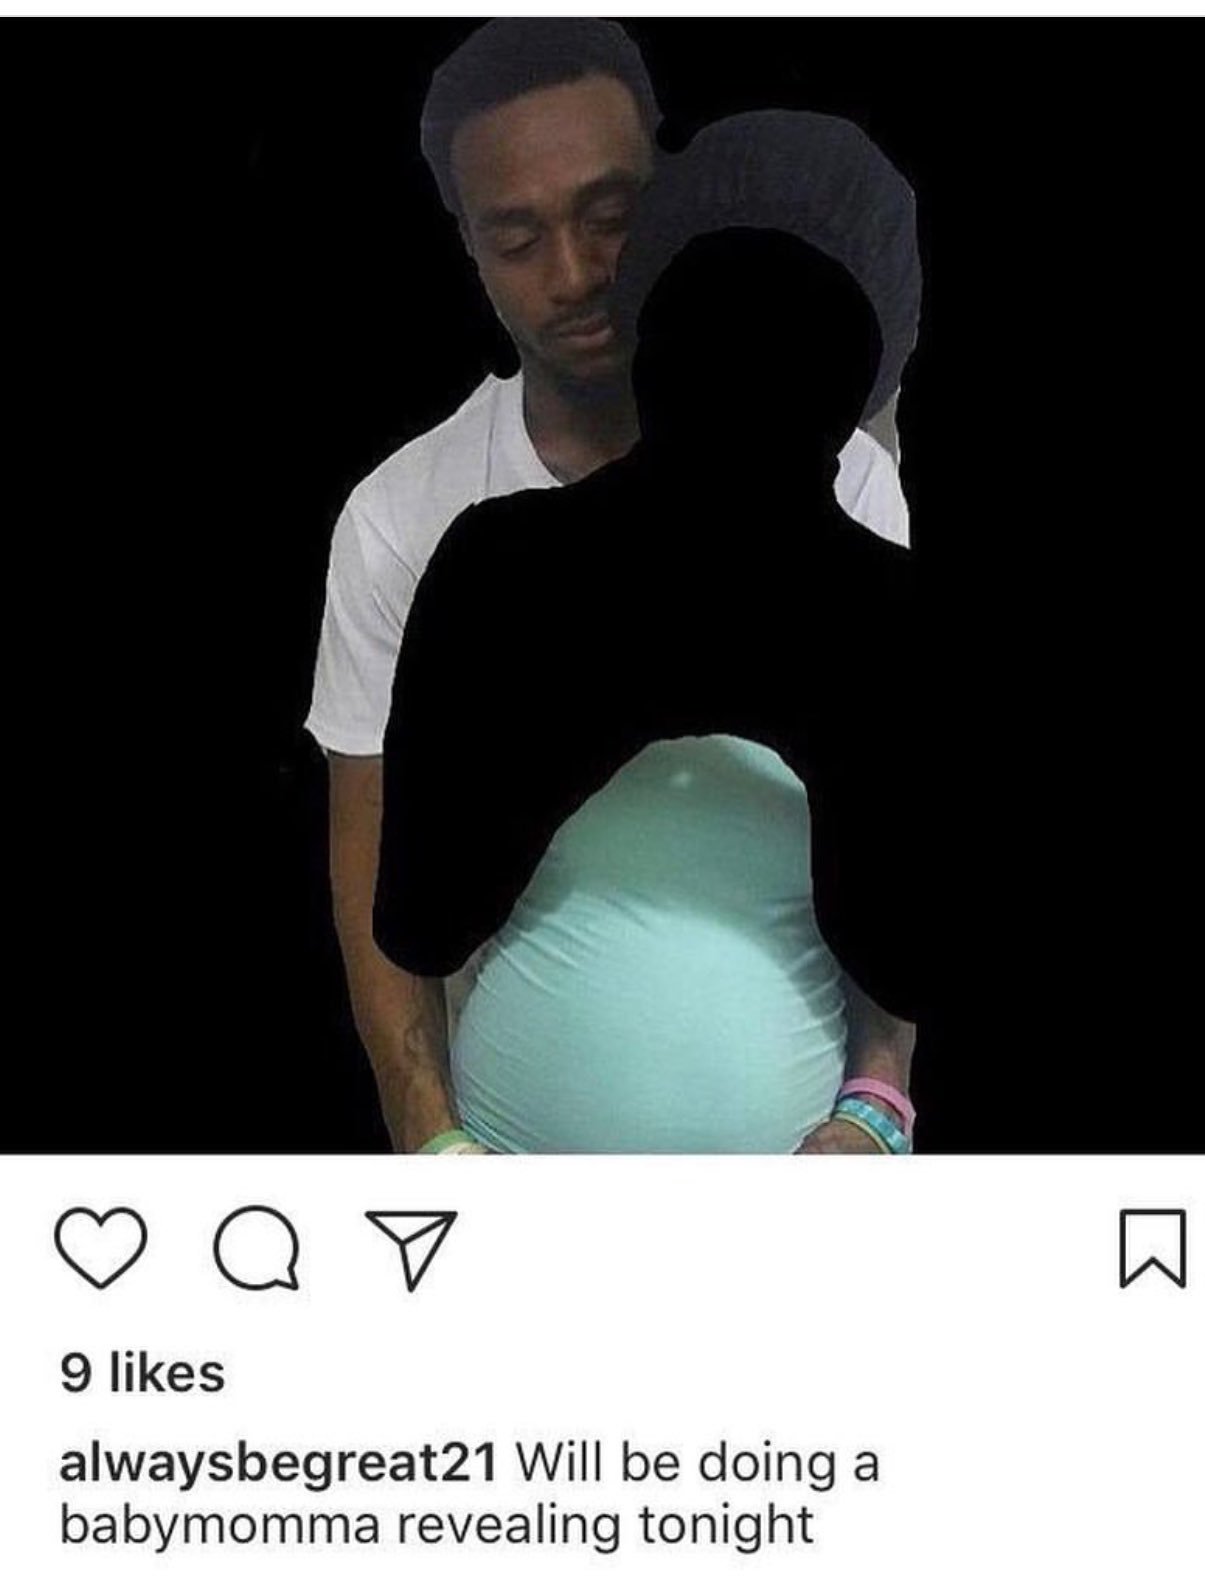 Man Goes Viral After Doing BABY MAMA REVEAL PARTY On Instagram 1